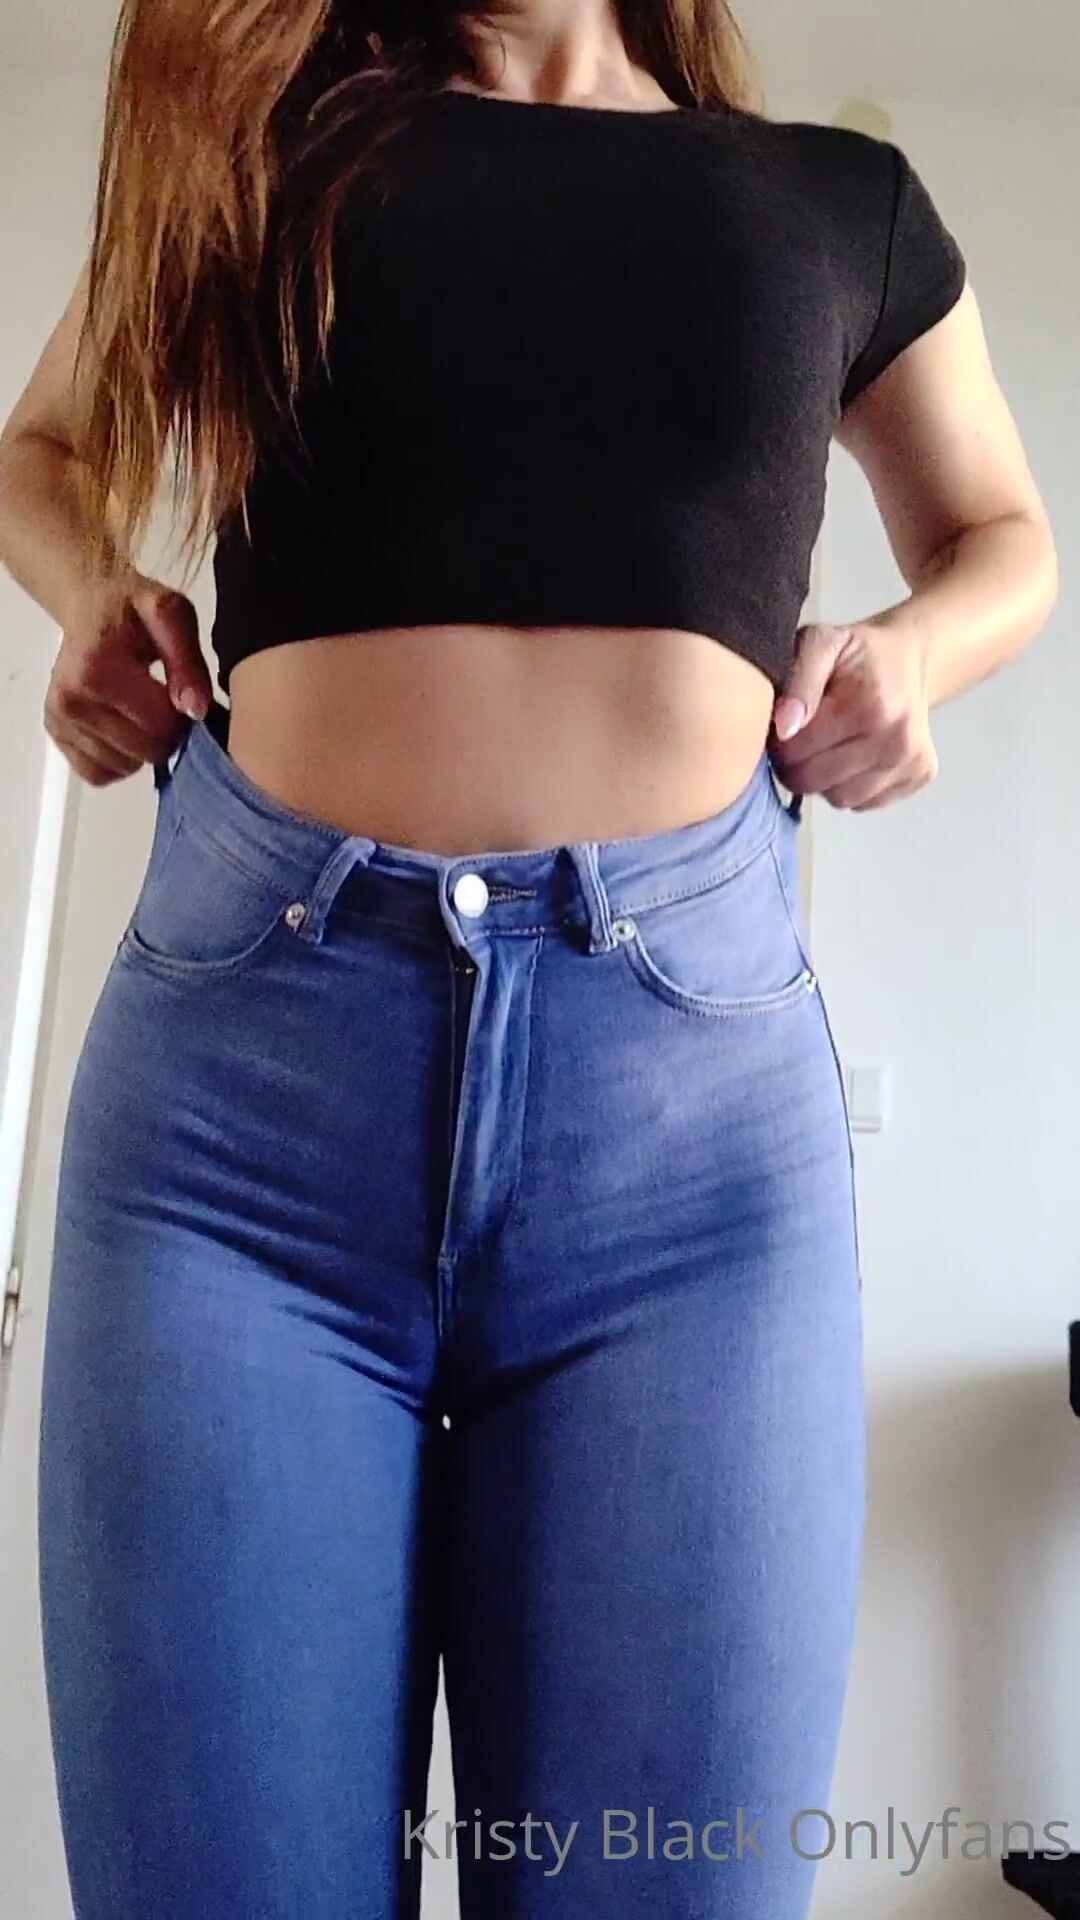 Kristy Black Jiggling into her jeans